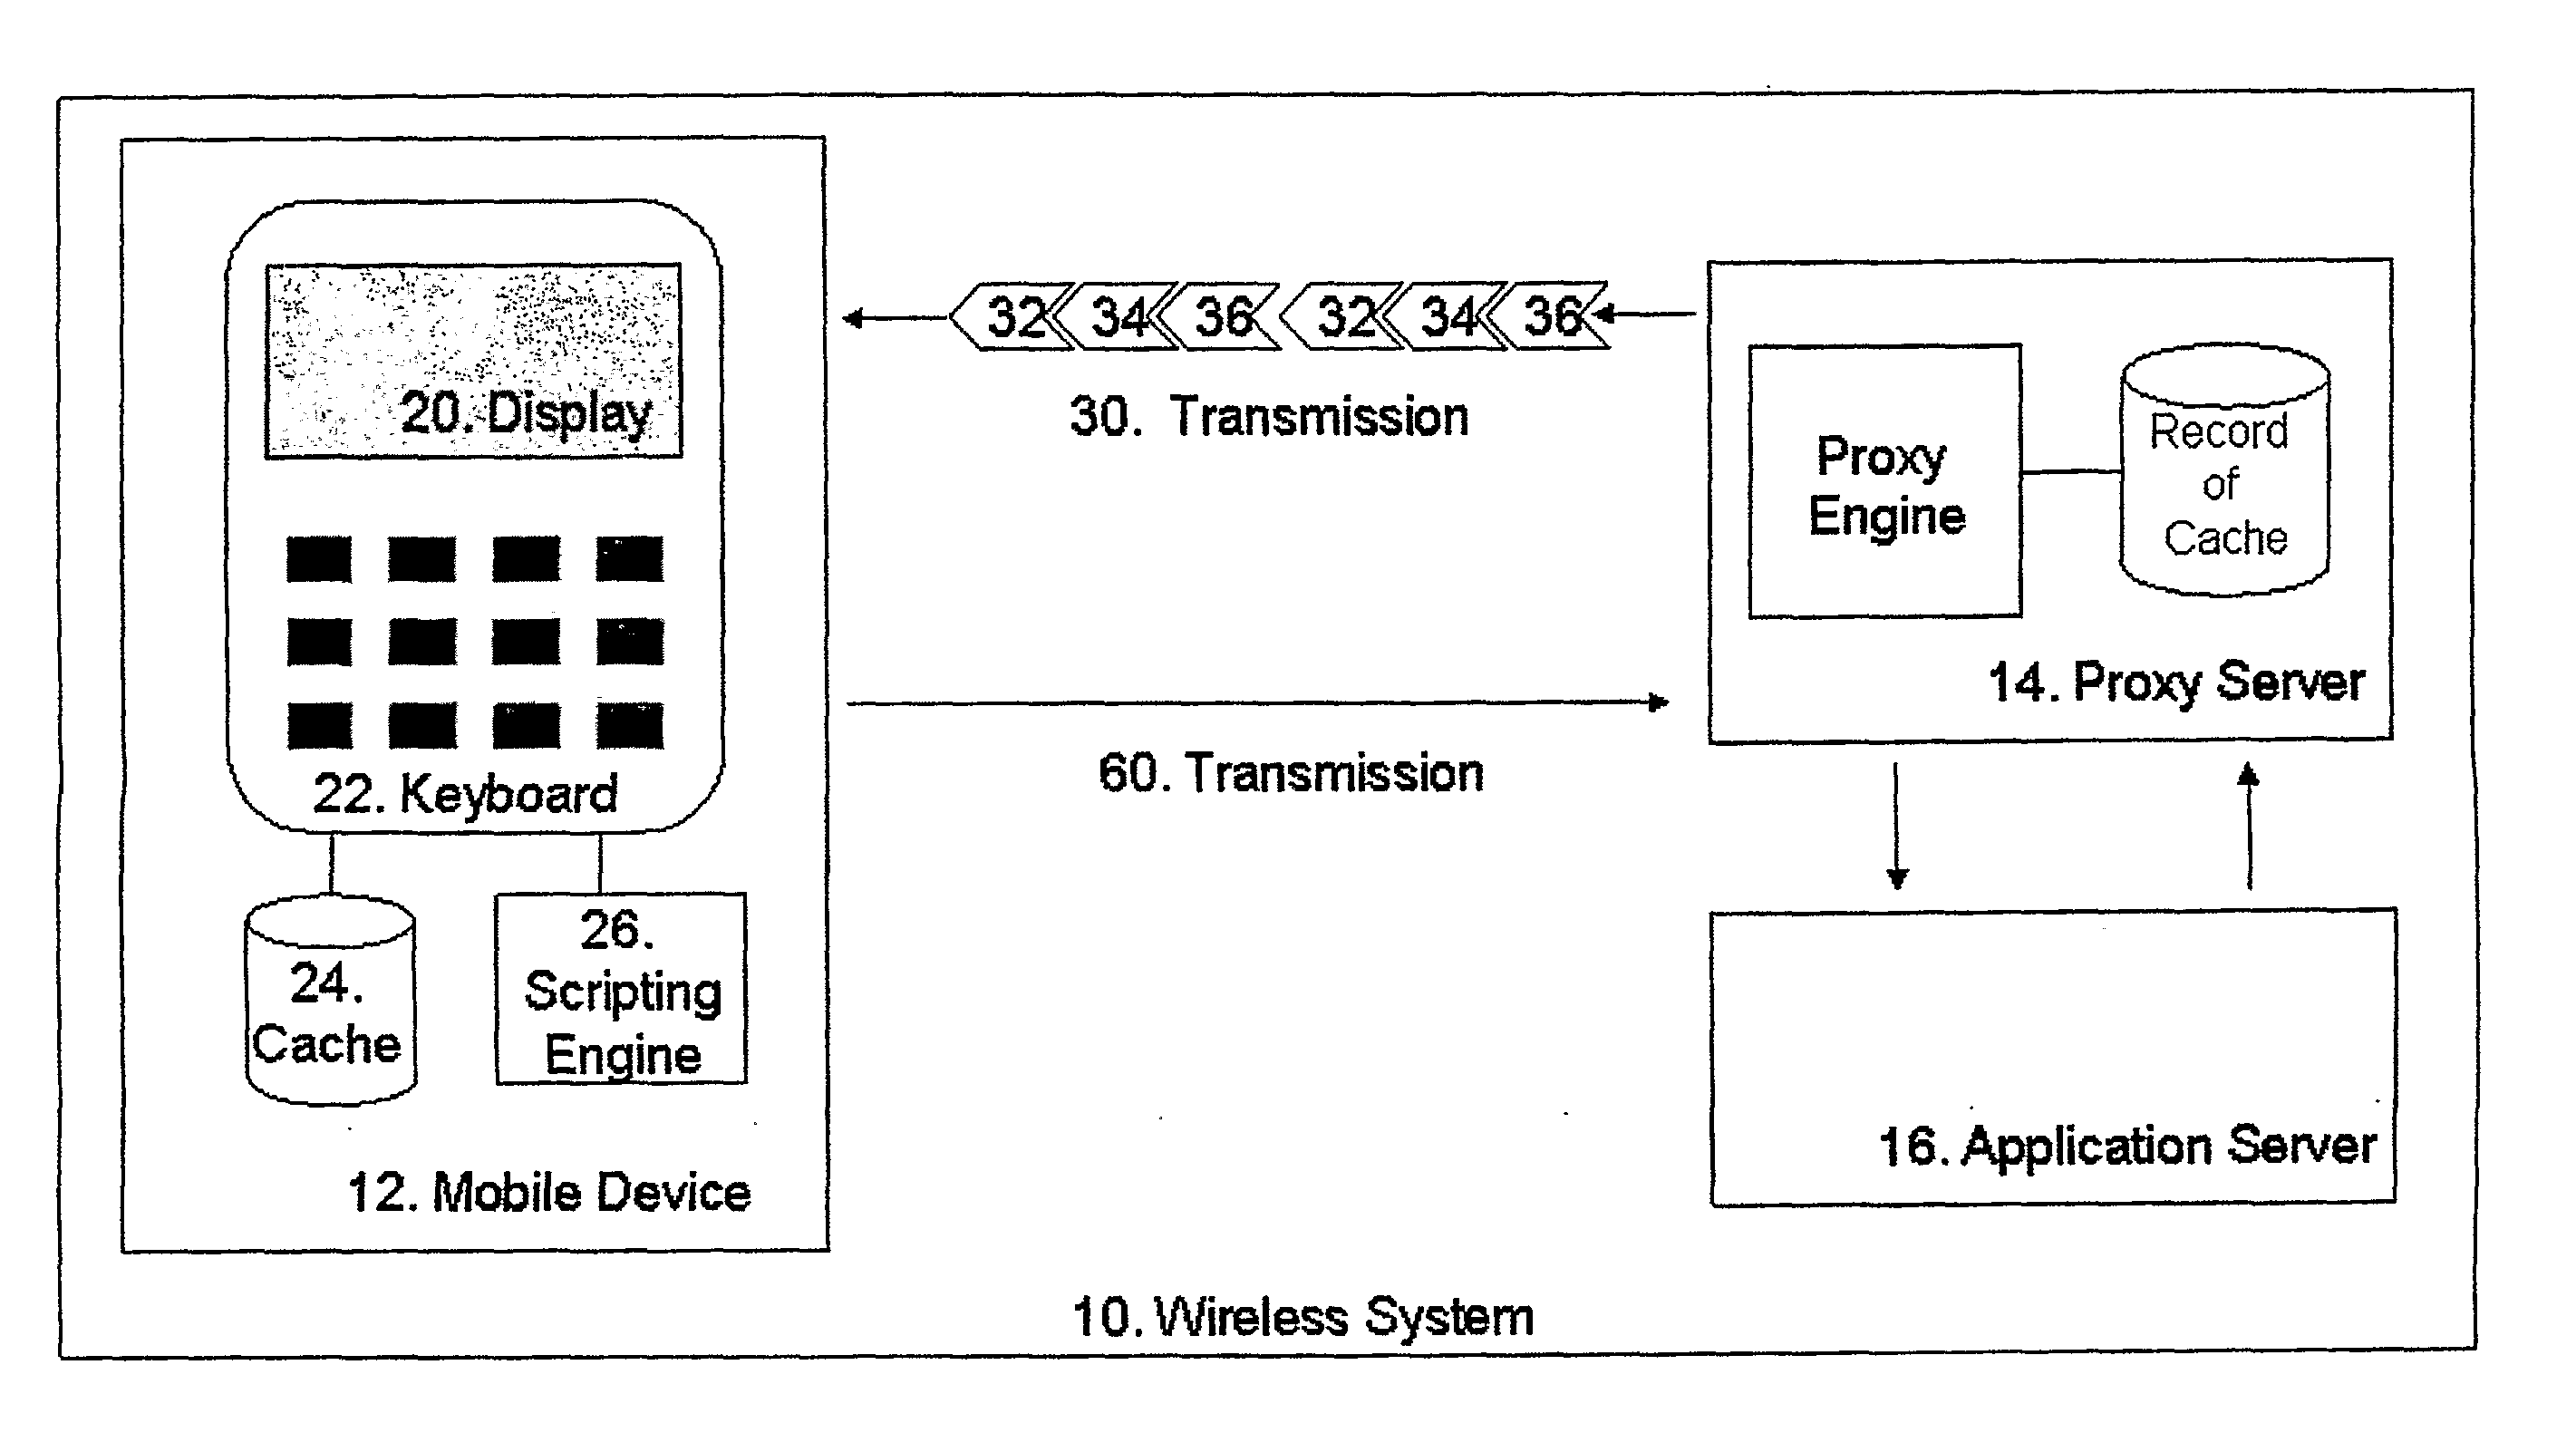 Systems, Methods, and Computer Readable Media for Providing Applications Style Functionality to a User